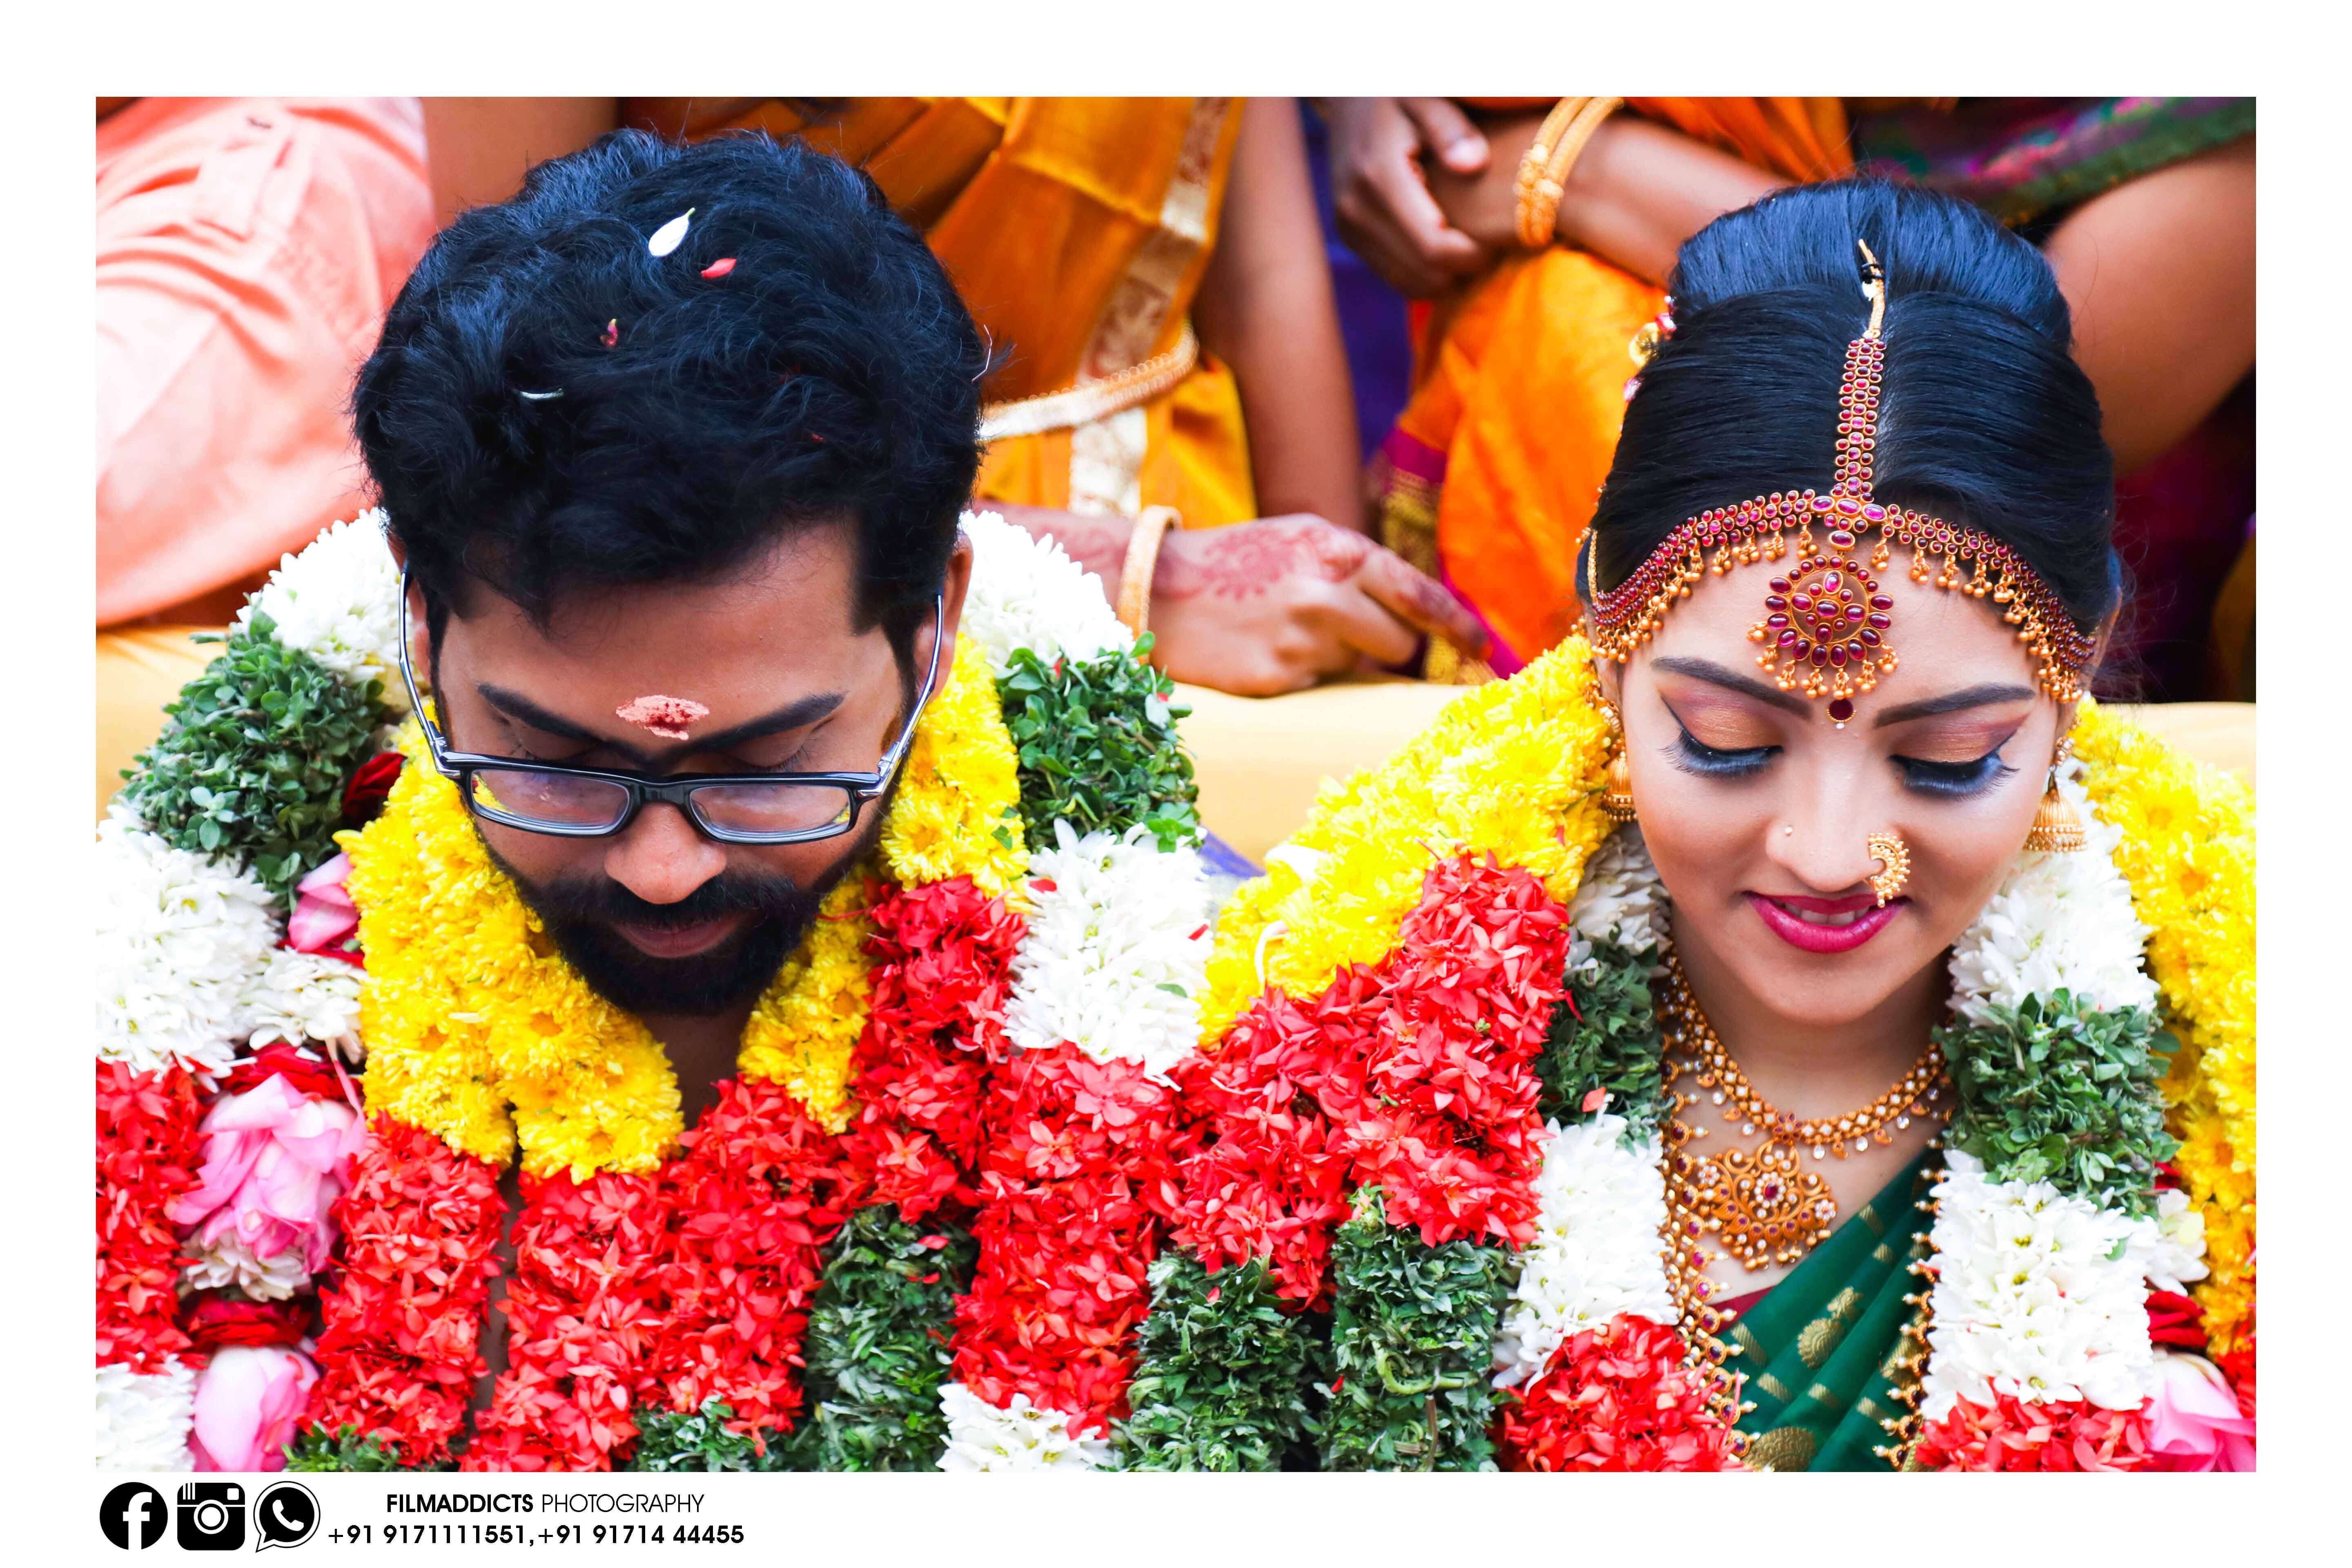  best-photography-in-theni, best-photography-in-cumbam ,best-photography-in-thevaram,best-photography-in-theni,best-photography-in-theni,best-photography-in-bodinayakanur,best-photography-in-periyakulam, best-candid-photography-in-theni, best-candid-photography-in-cumbam ,in-thevaram,best-candid-photography-in-theni,best-candid-photography-in-theni,best-candid-photography-in-bodinayakanur,best-candid-photography-in-periyakulam, candid-photography-in-theni, candid-photography-in-cumbam ,in-thevaram,candid-photography-in-theni,candid-photography-in-theni,candid-photography-in-bodinayakanur,candid-photography-in-periyakulam, wedding-photography-in-theni, wedding-photography-in-cumbam ,in-thevaram,wedding-photography-in-theni,wedding-photography-in-theni,wedding-photography-in-bodinayakanur,wedding-photography-in-periyakulam, best-wedding-photography-in-theni, best-wedding-photography-in-cumbam ,in-thevaram,best-wedding-photography-in-theni,best-wedding-photography-in-theni,best-wedding-photography-in-bodinayakanur,best-wedding-photography-in-periyakulam, 